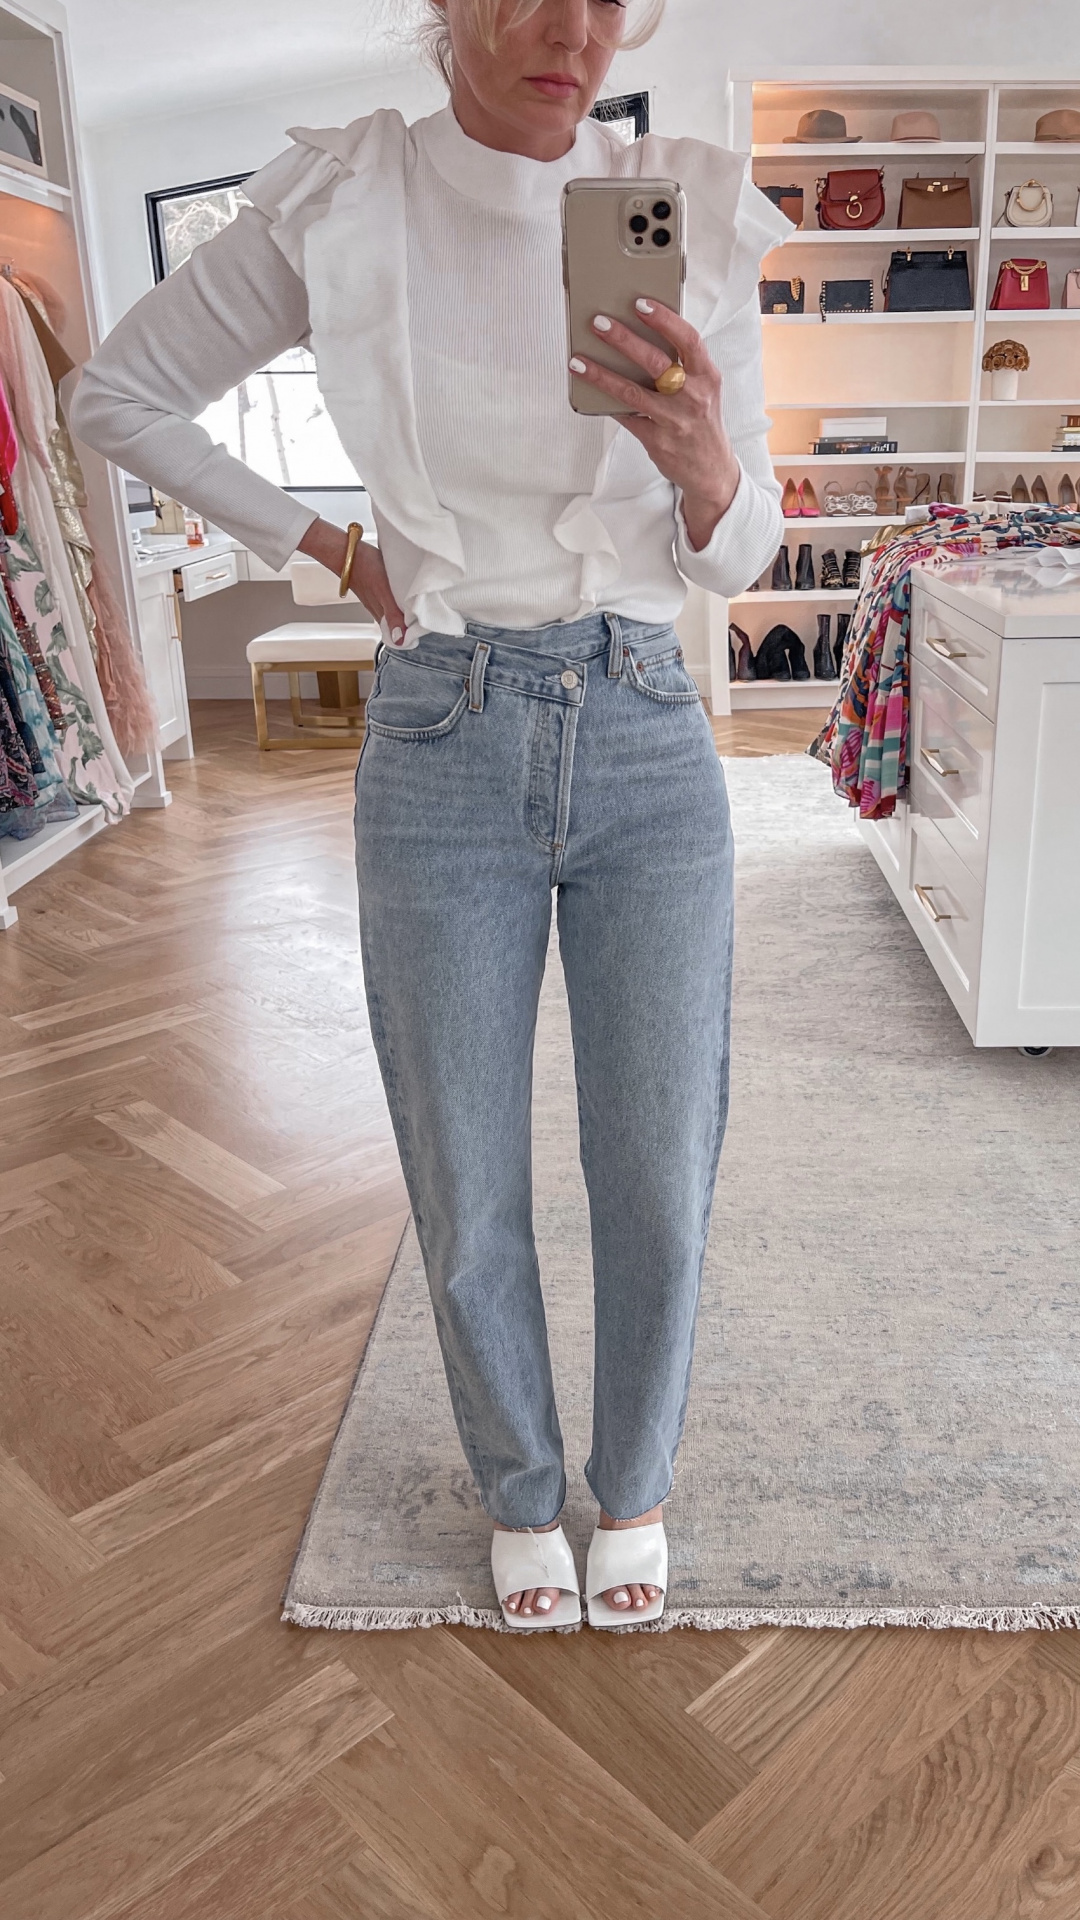 denim trends, denim trends 2022, womens denim trends 2022, are skinny jeans still in style 2022, new denim trends, erin busbee, busbee style, fashion over 40, telluride, colorado, agolde criss cross jeans